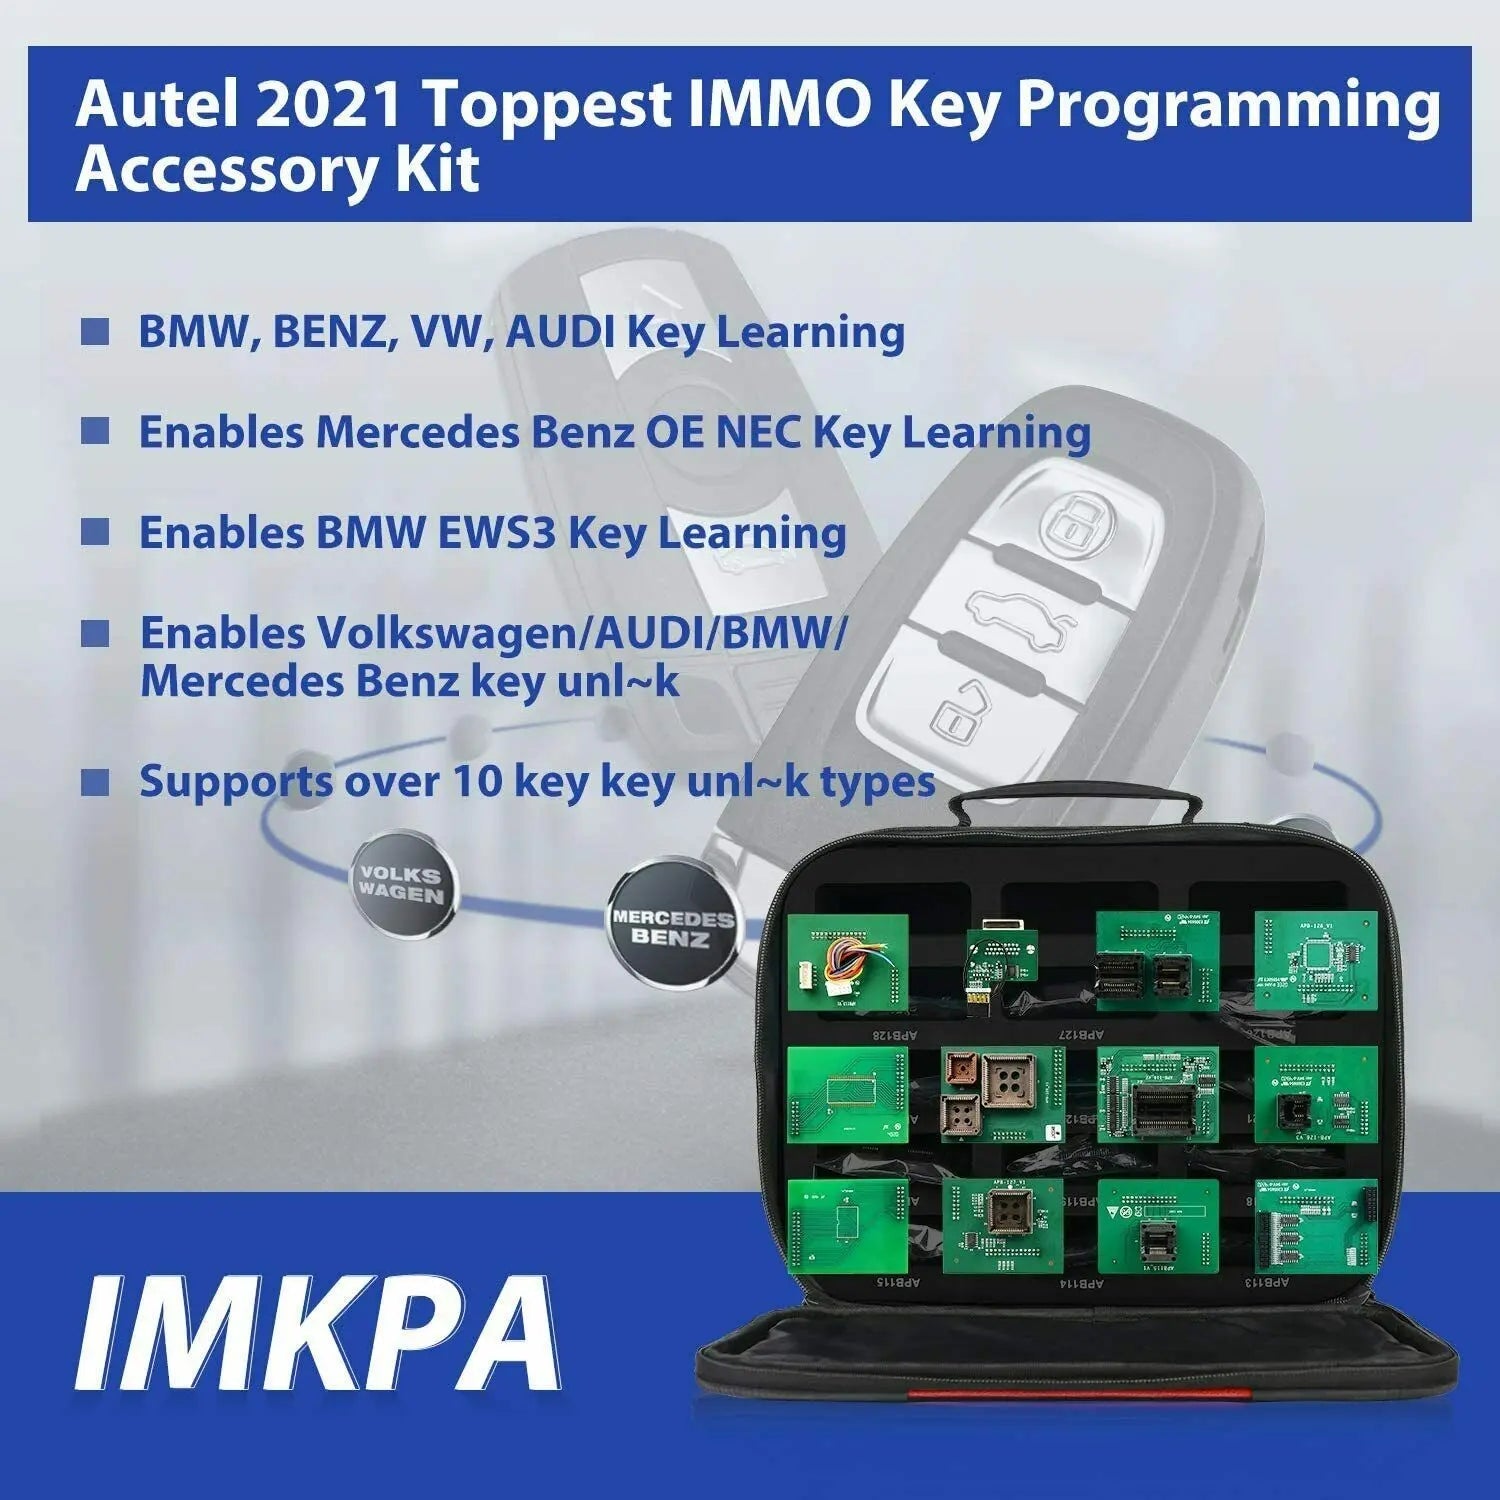 Autel IMKPA Kit Work With XP400PRO Key Chip Programming Accessories Expanded Key Programming Adapter For IM508 / IM608 (Pro) - Dynamex